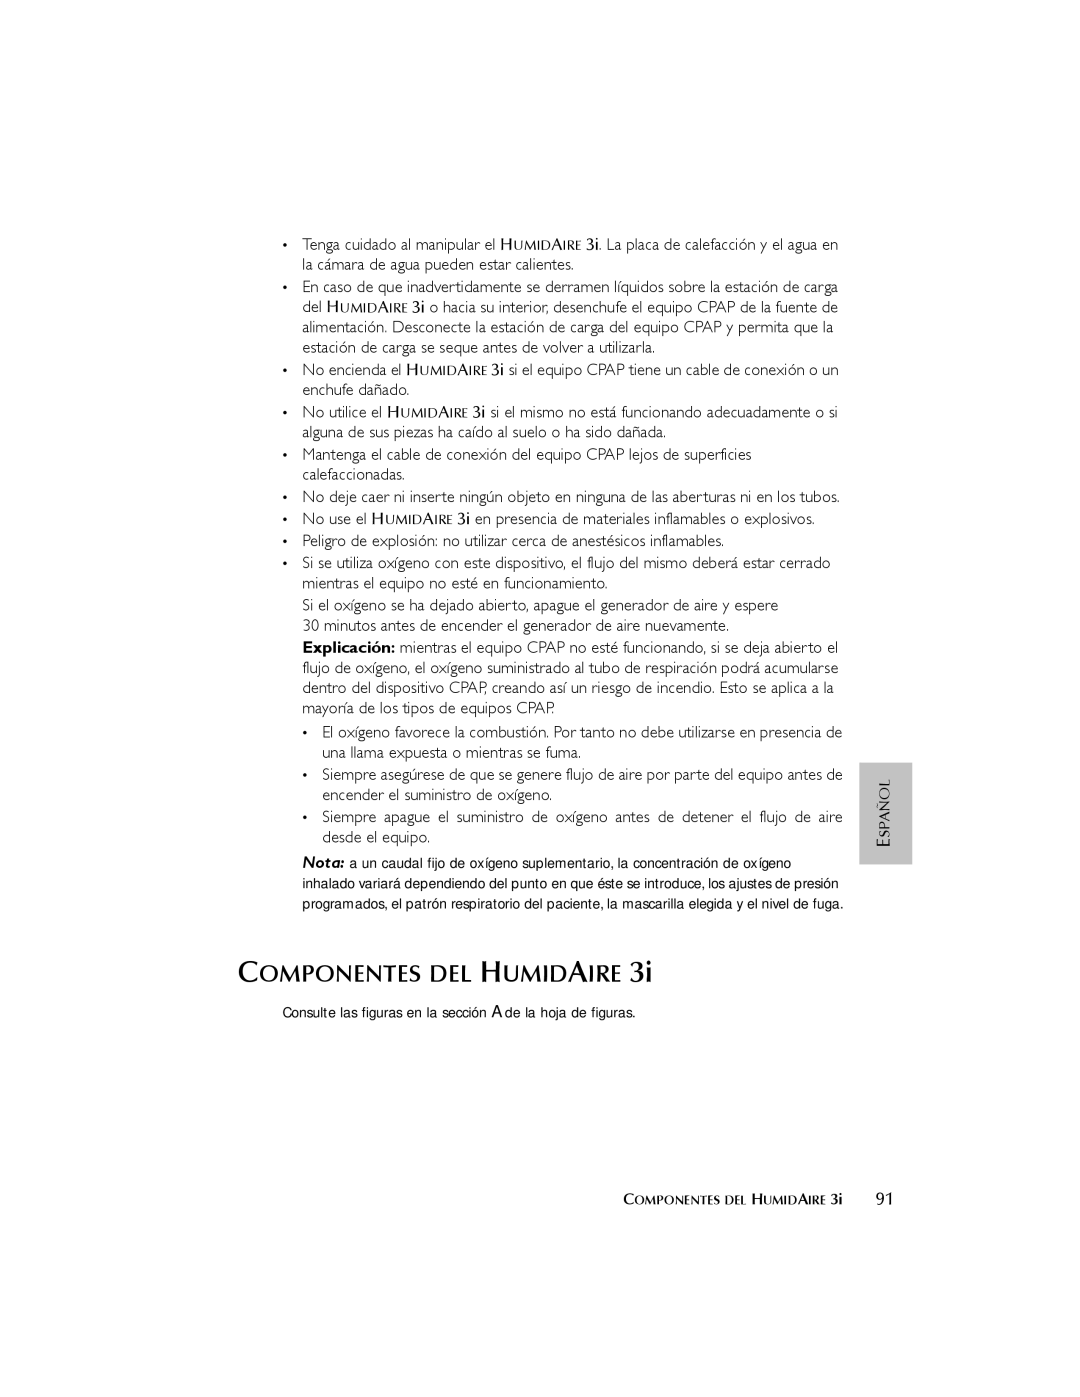 ResMed 3I user manual Componentes DEL Humidaire 